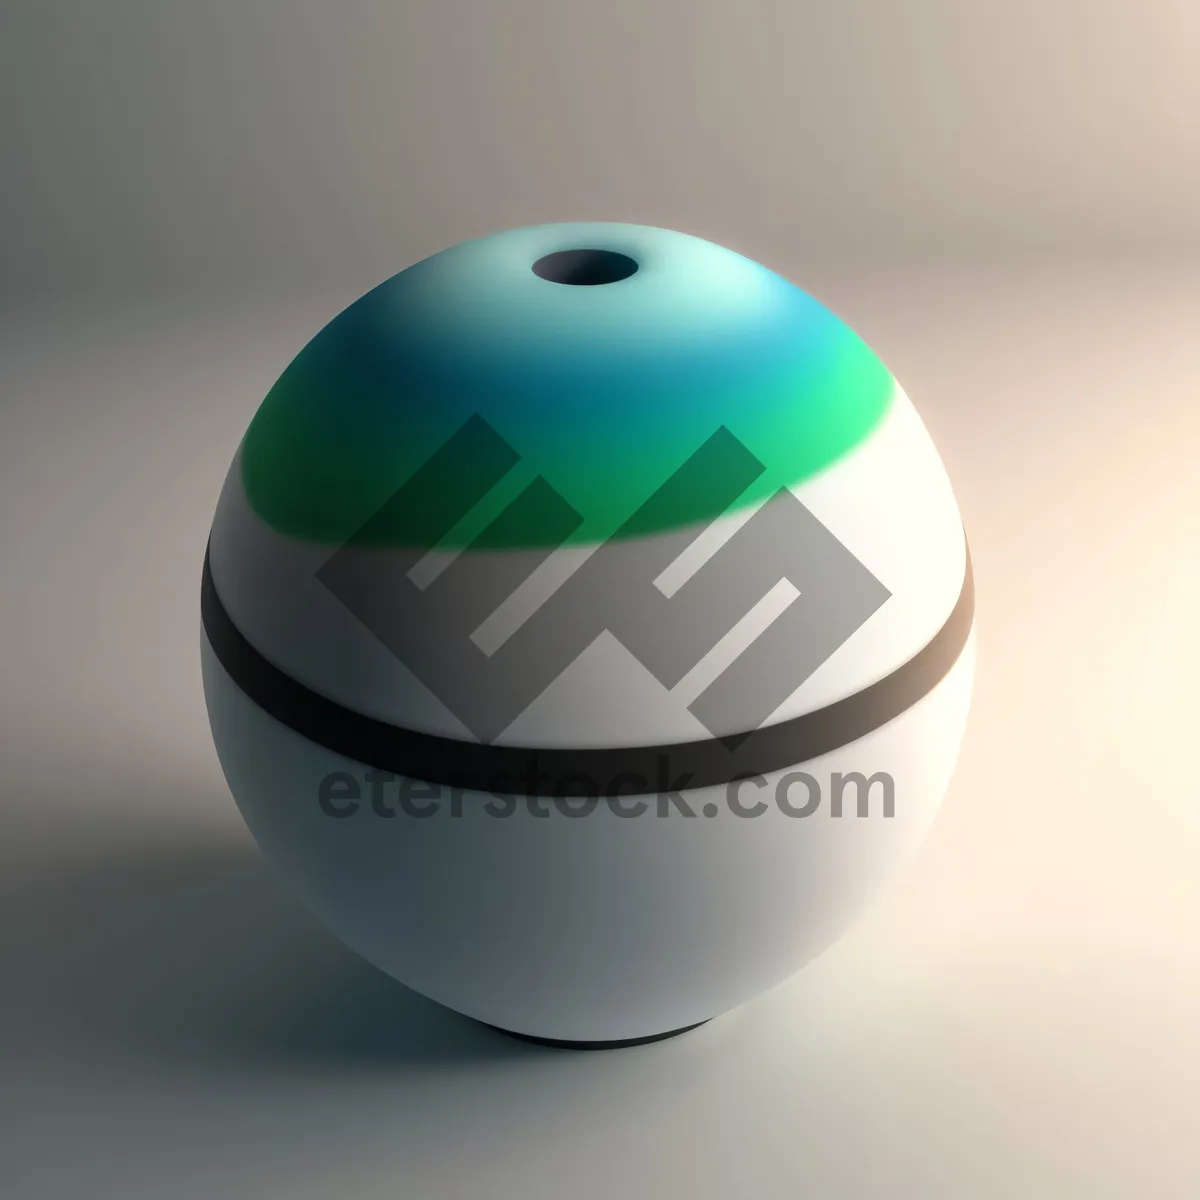 Picture of Shiny Glass Sphere Icon with 3D Relief